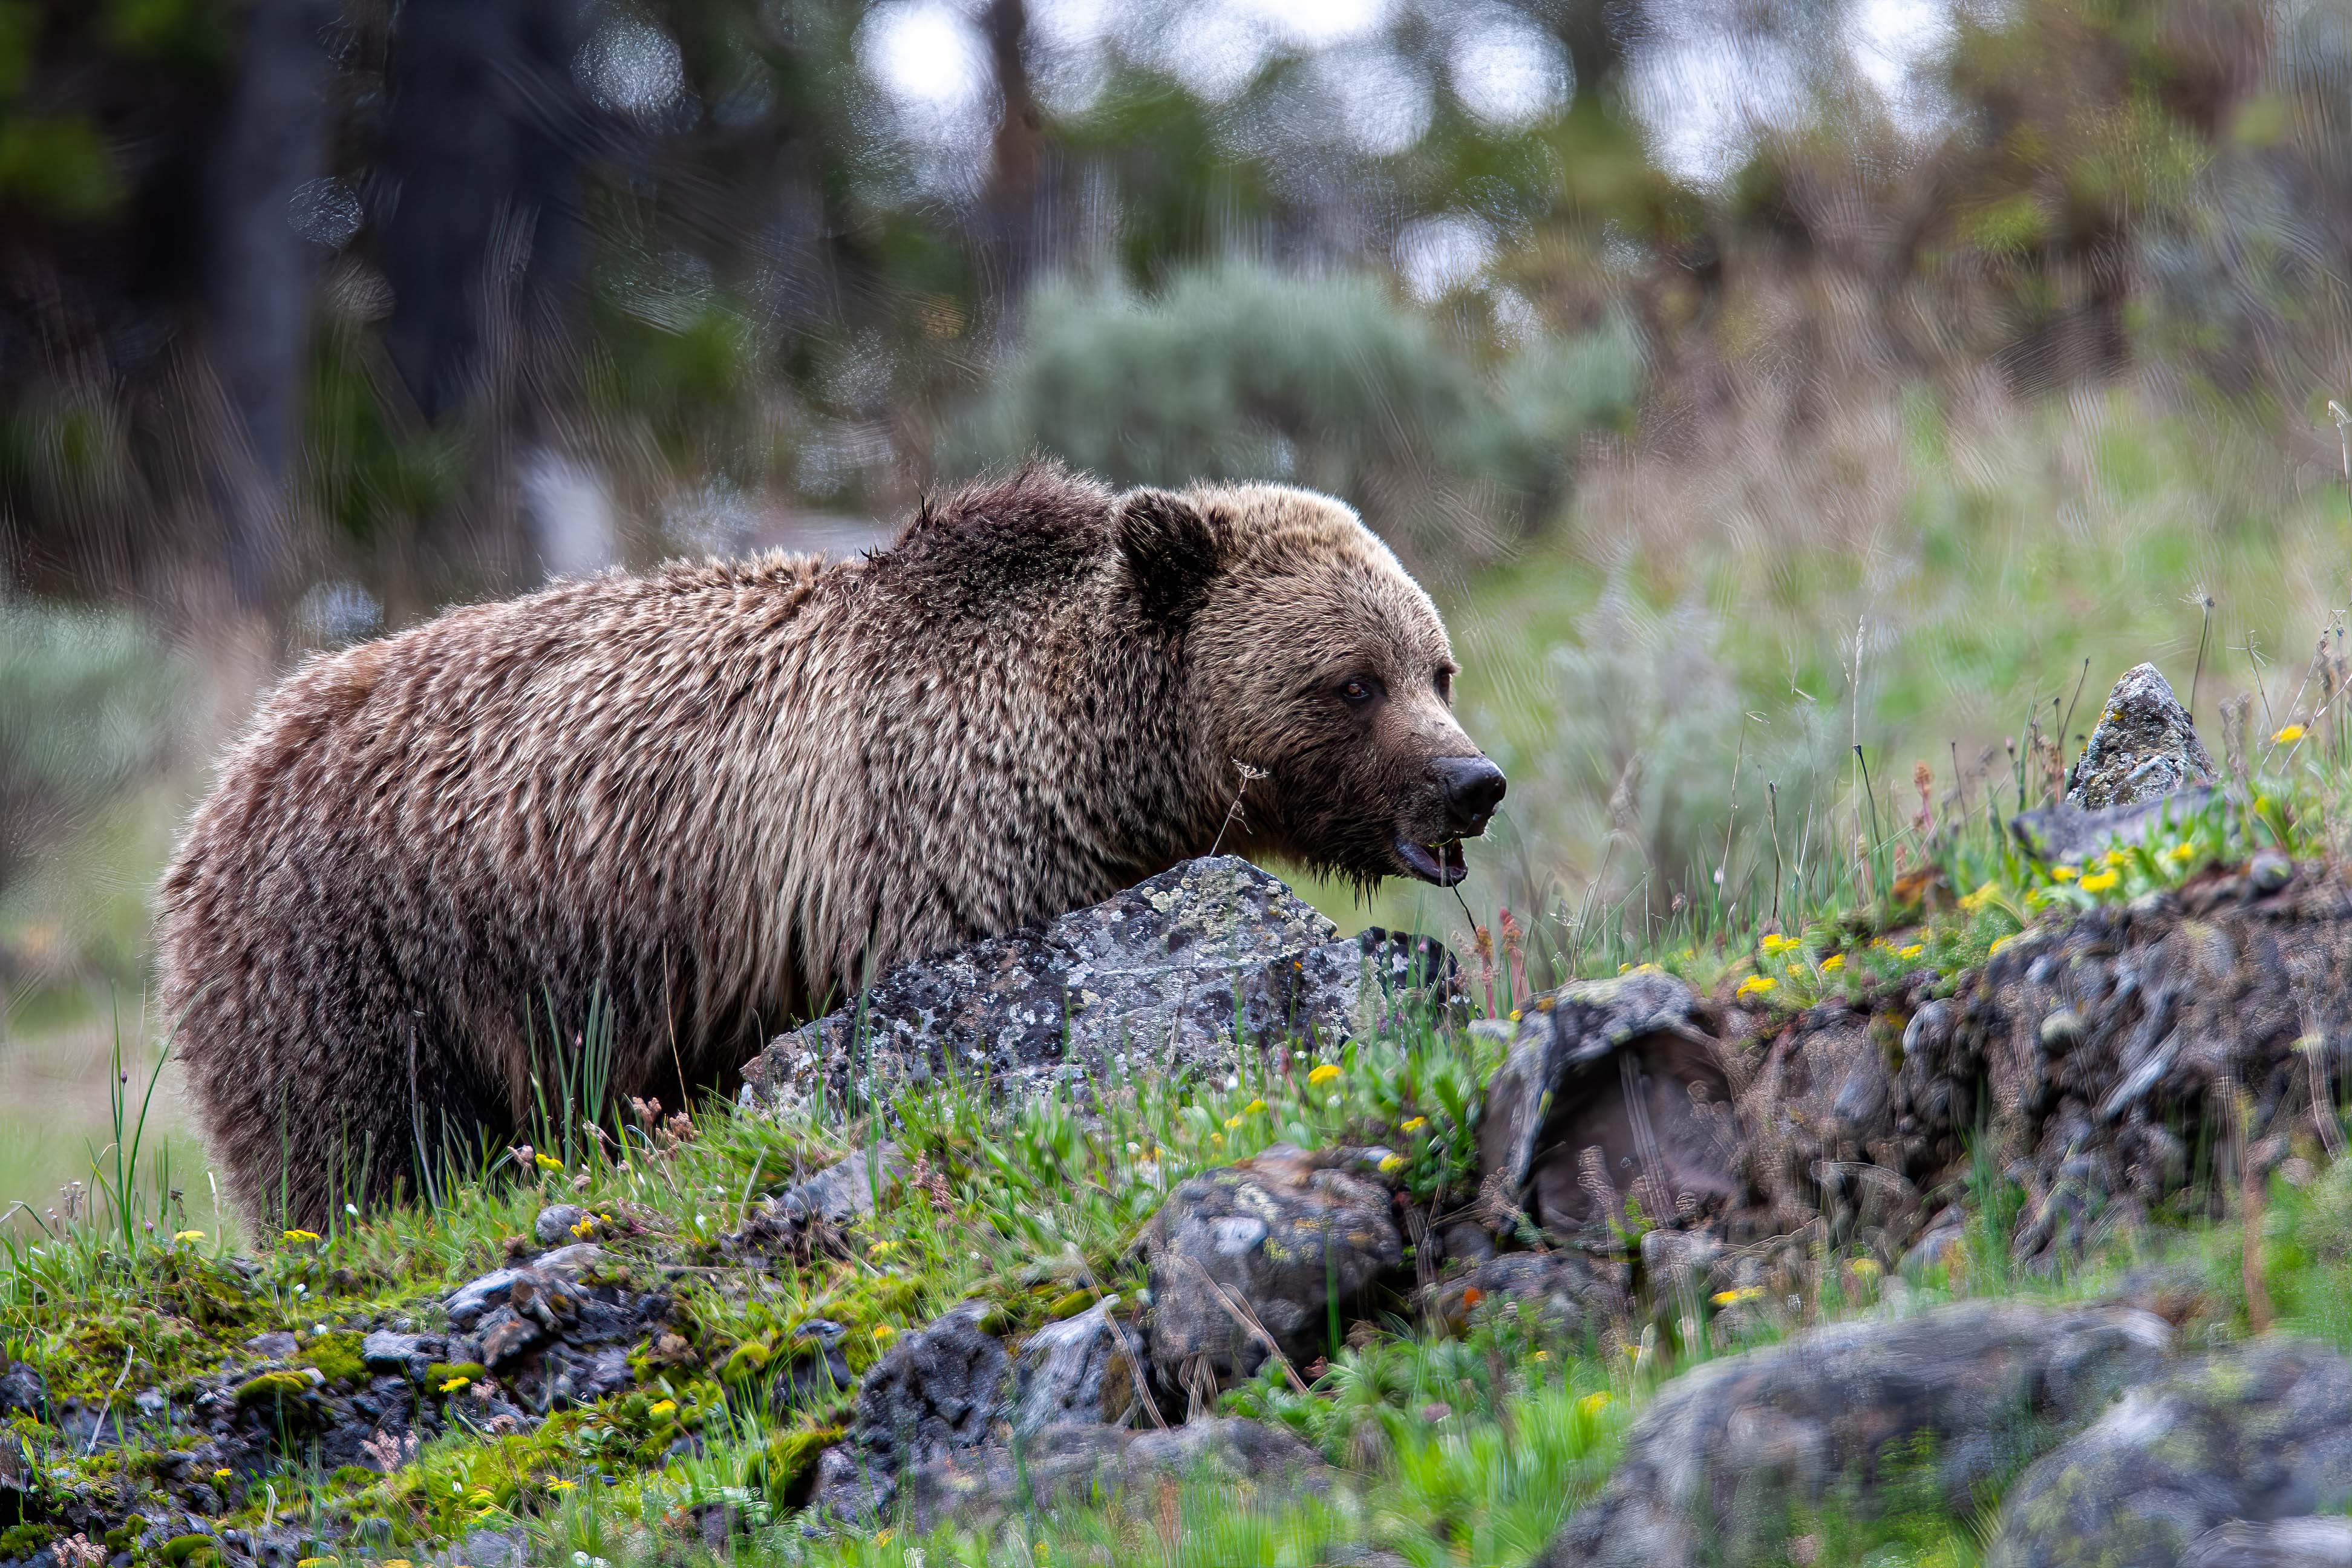 Grizzly in Icebox Canyon facing uphill May 12.jpg